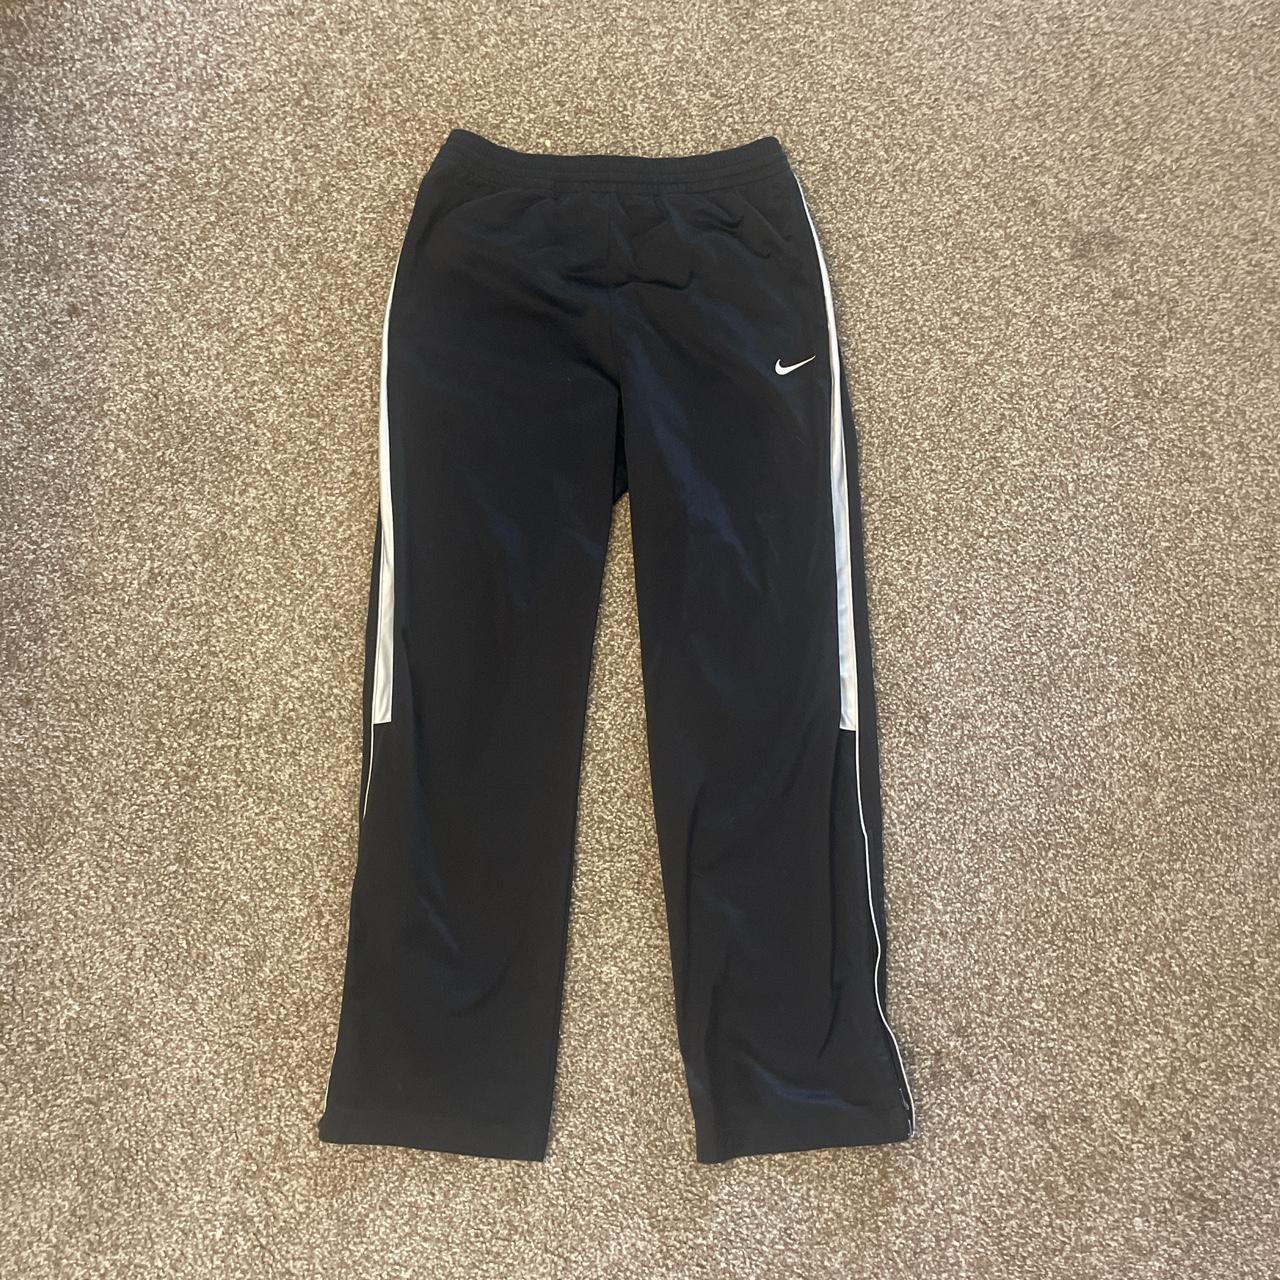 Vintage Nike Track Pants Condition 10/10 (no rips, - Depop